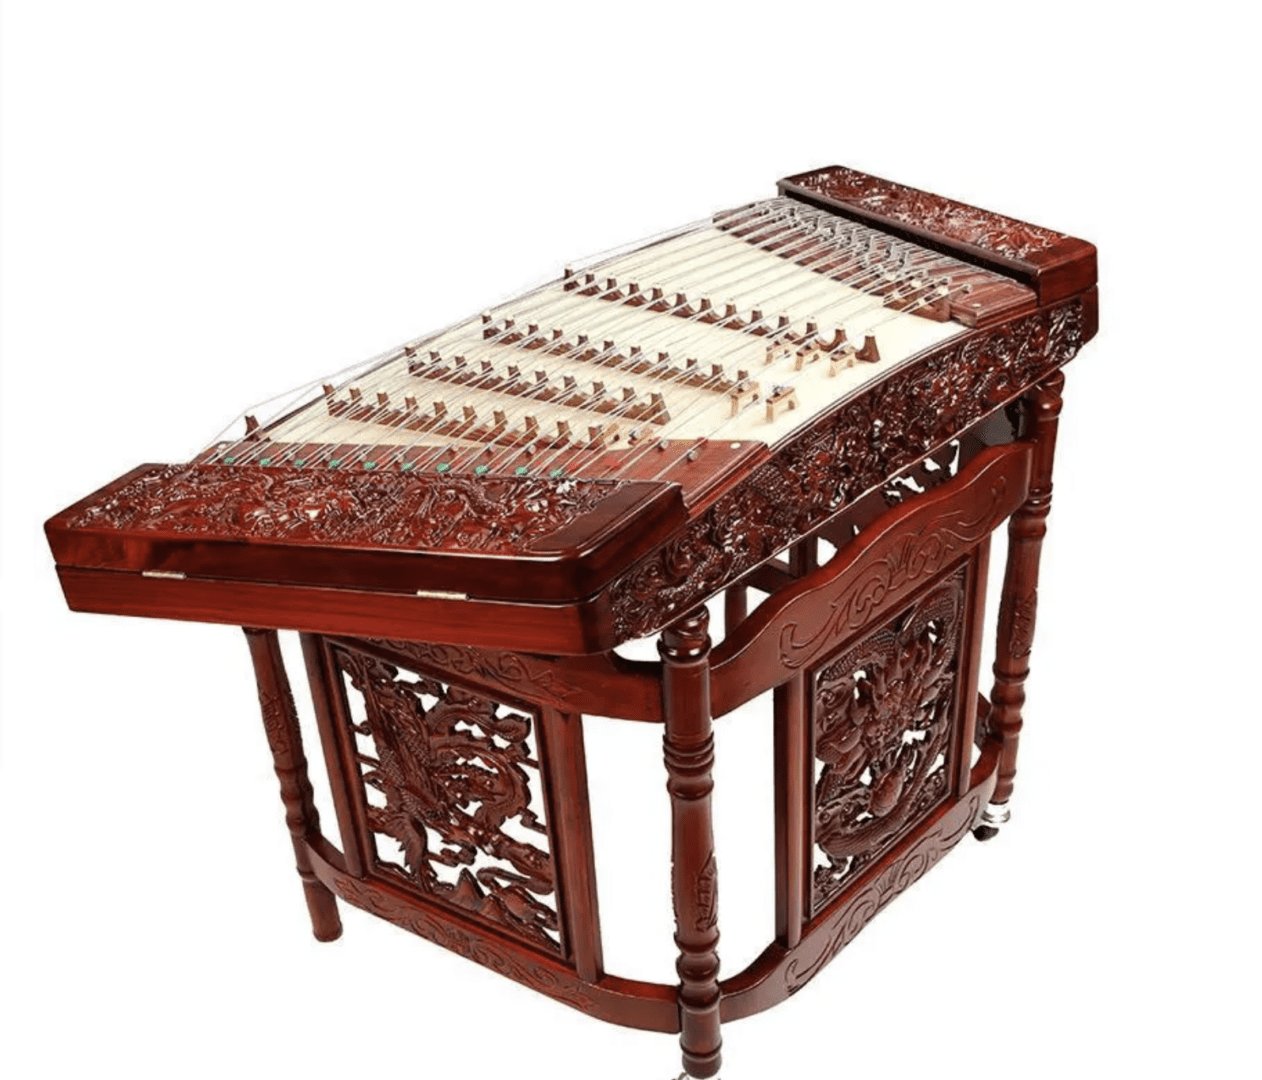 Intricately carved wooden yangqin, a Chinese hammered dulcimer, isolated on a white background.